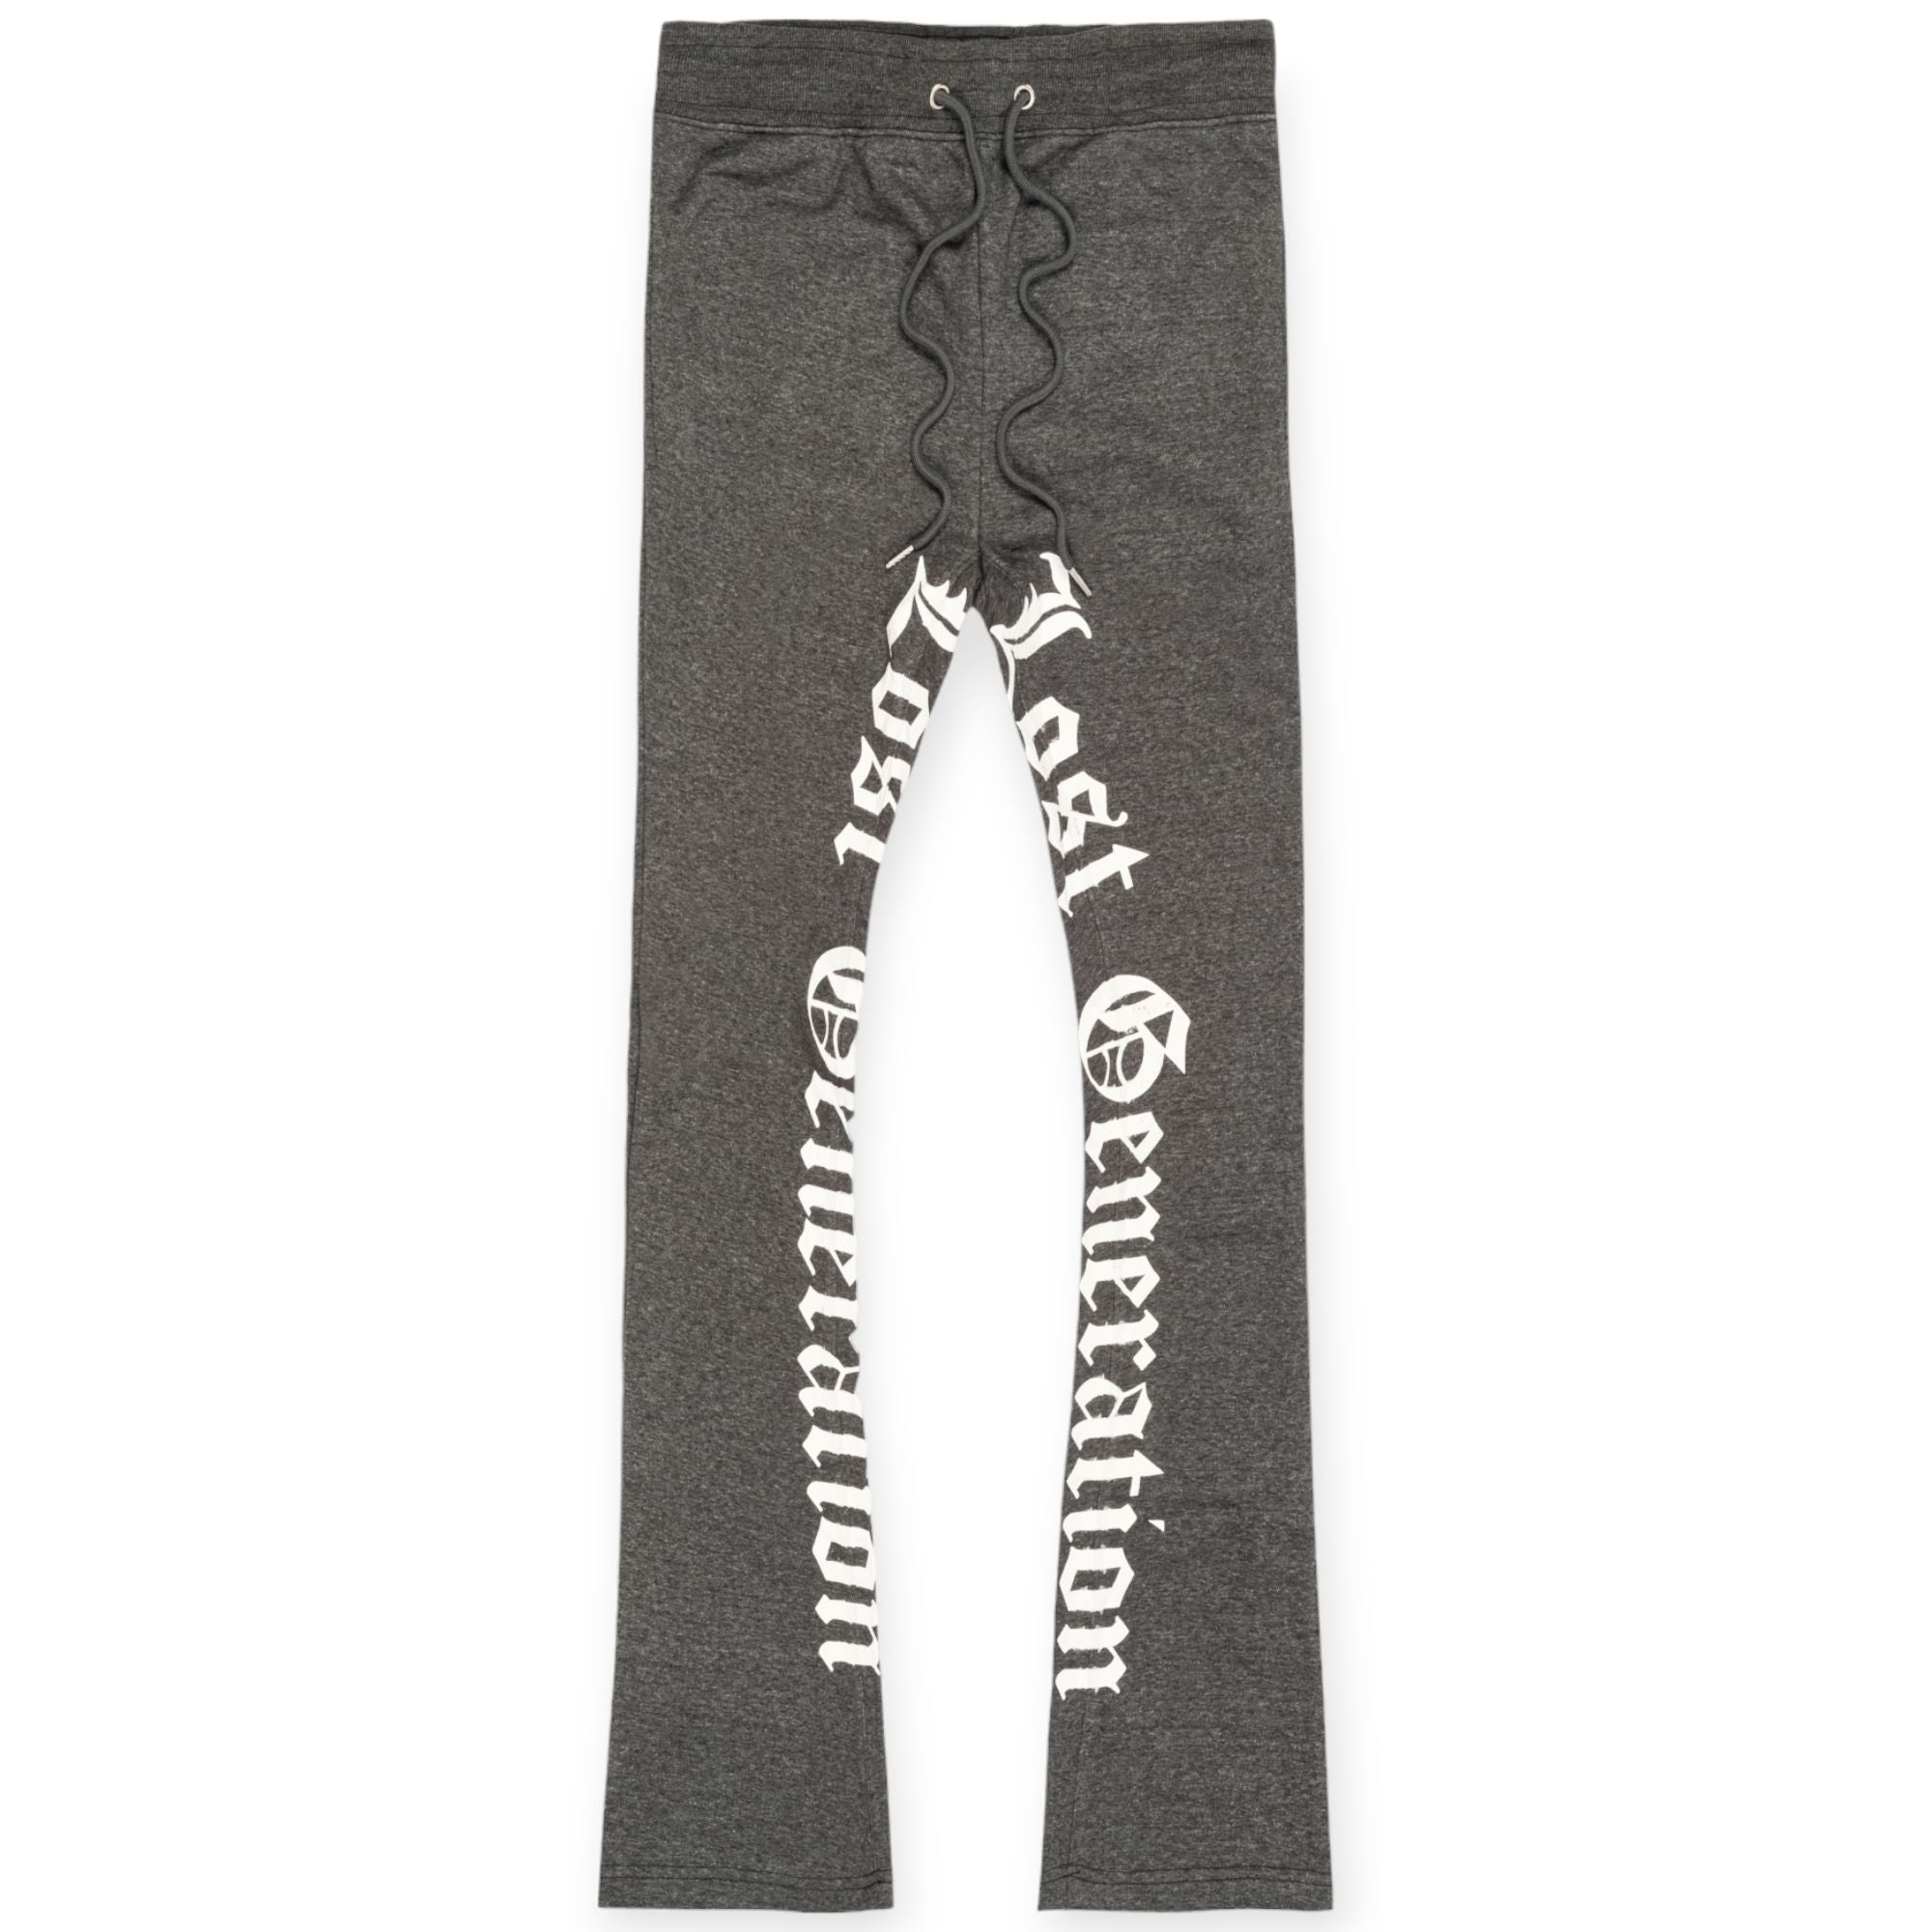 Nexus Clothing Men Lost Generation Stacked Sweatpants (Charcoal Grey White)-Charcoal Grey White-Small-Nexus Clothing